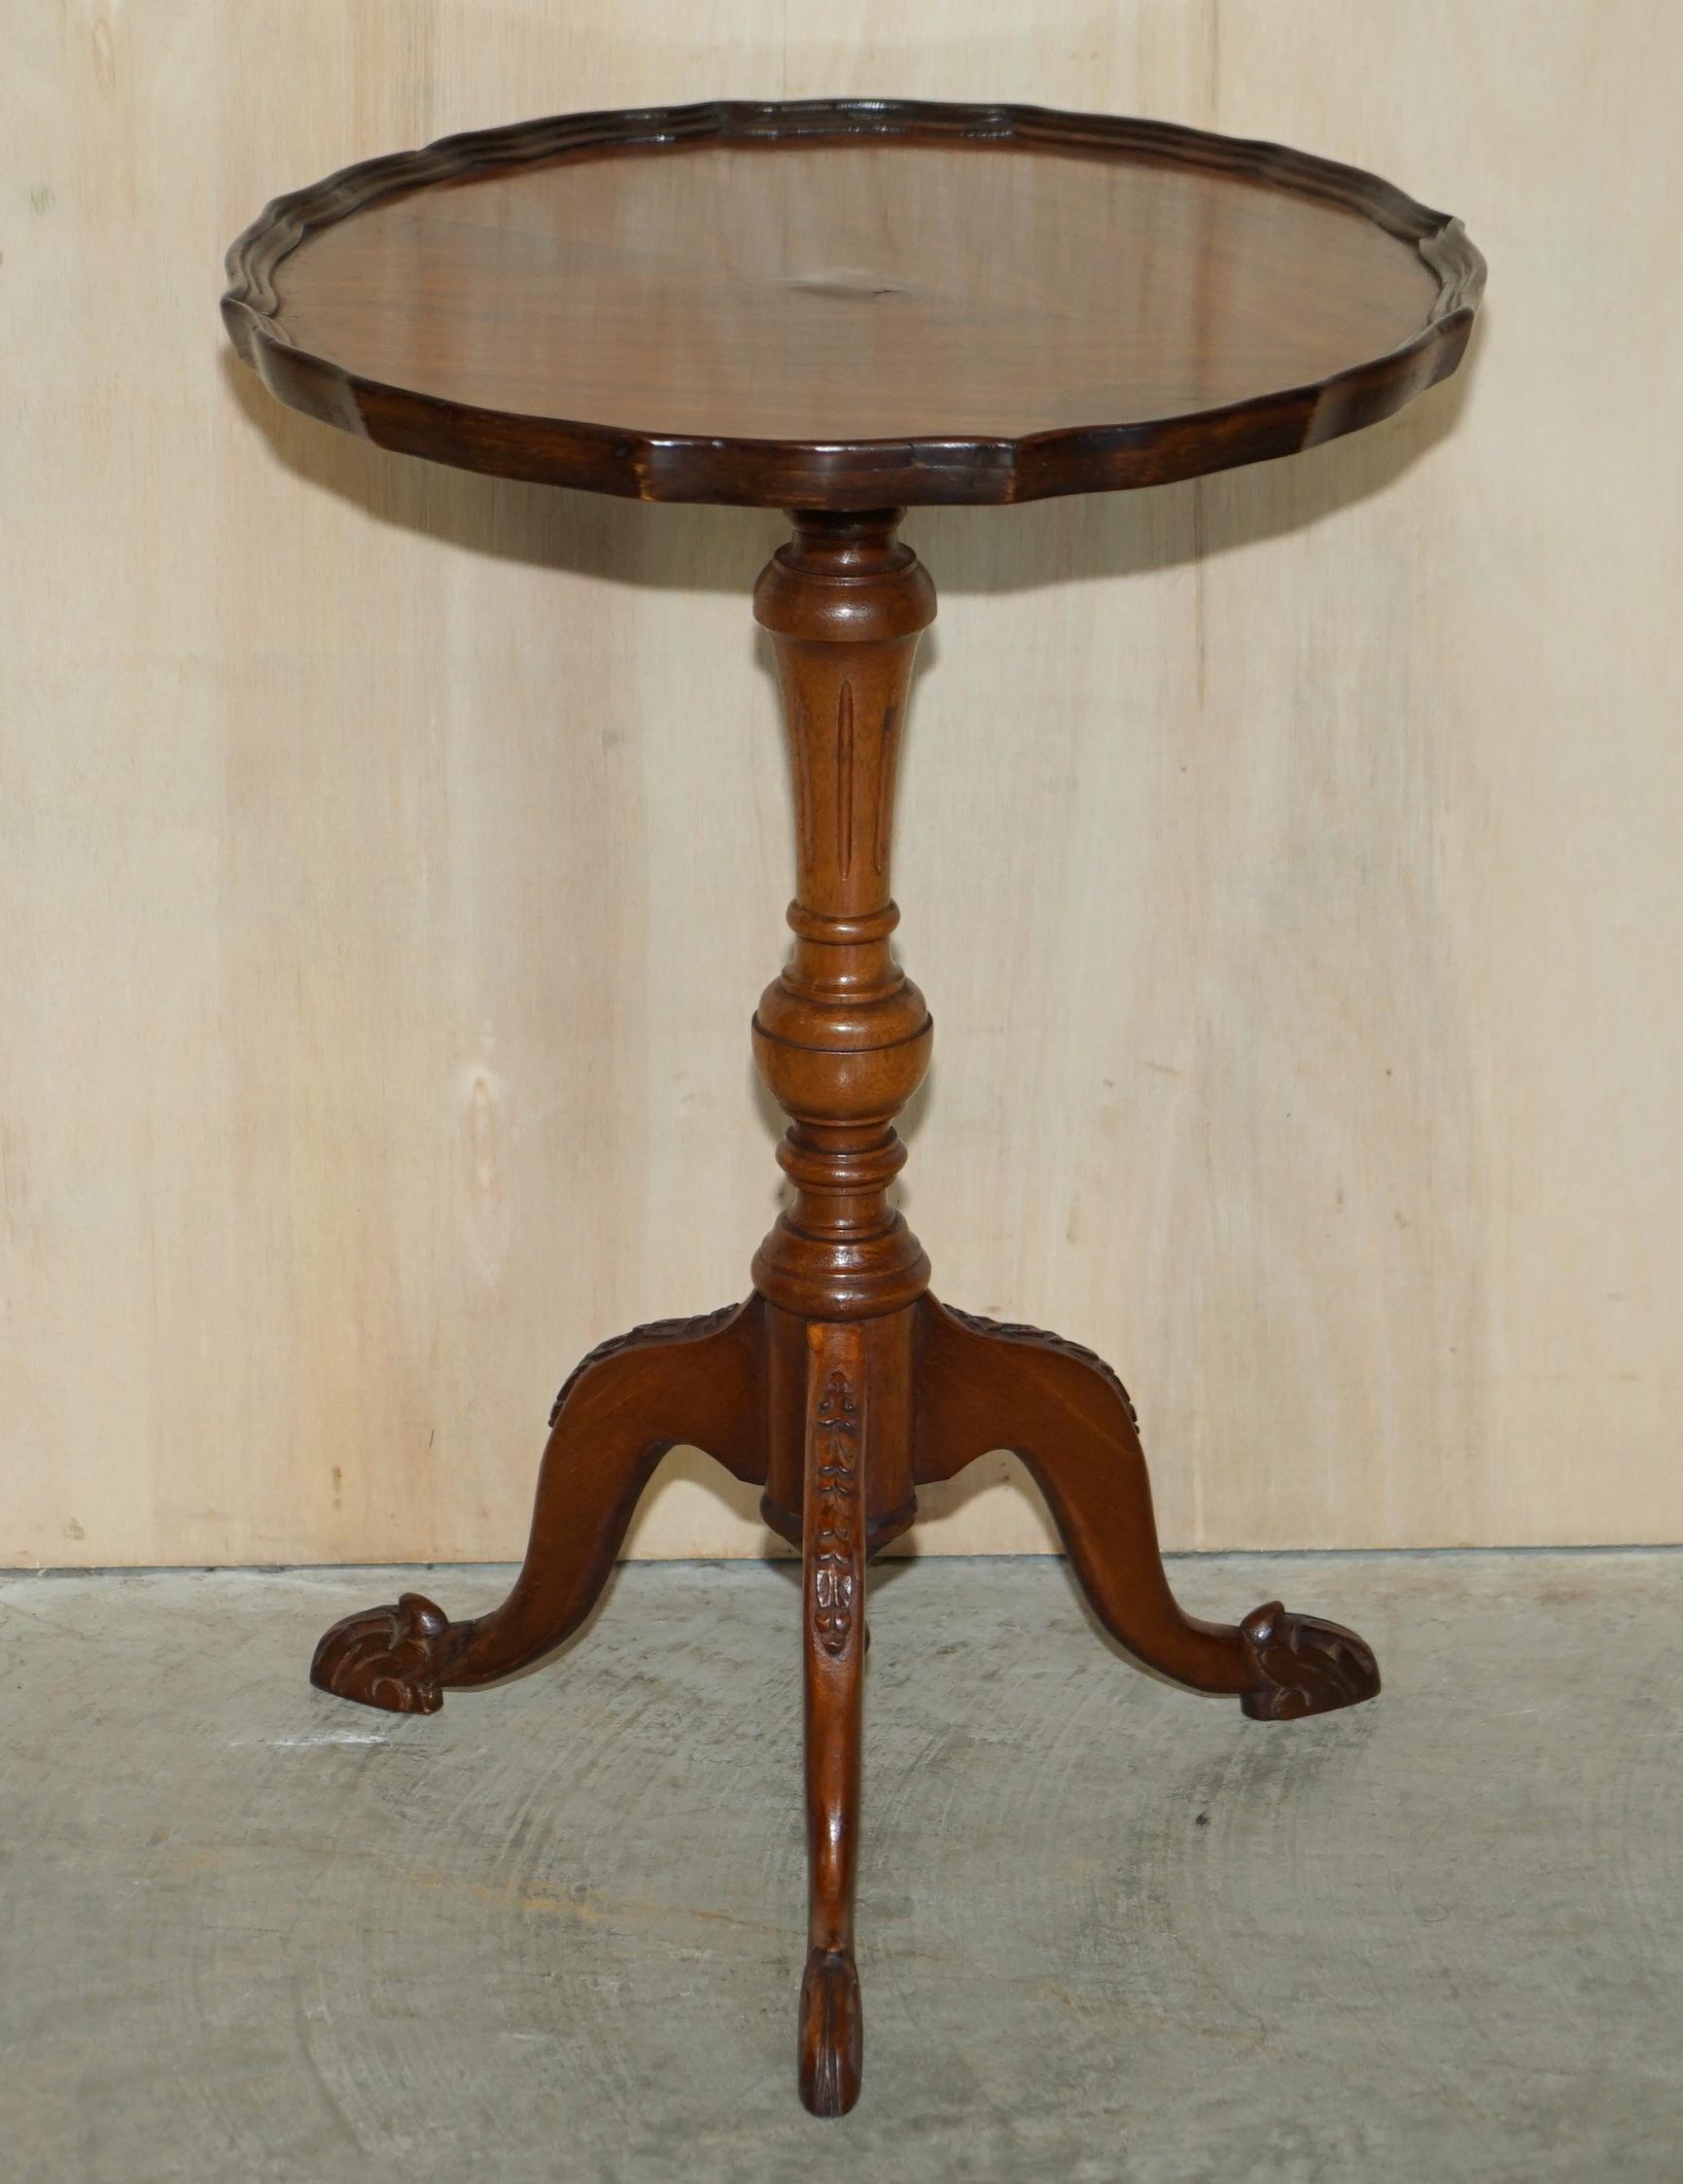 We are delighted to offer this lovely vintage light Mahogany Pie crust edge lamp or side table.

It has a lovely flamed mahogany top

A good-looking well-made tripod table in good, we have cleaned waxed and polished it from top to bottom, there